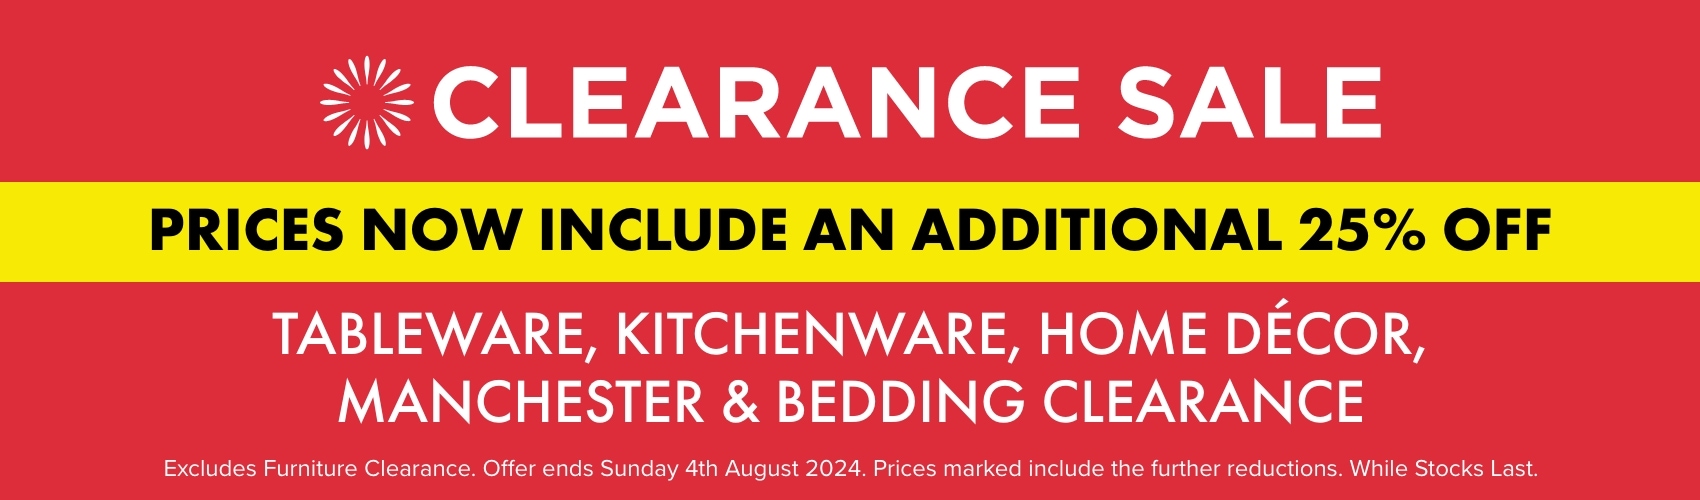 Prices now include an additional 25% OFF Tableware, Kitchenware, Home Décor, Manchester & Bedding Clearance